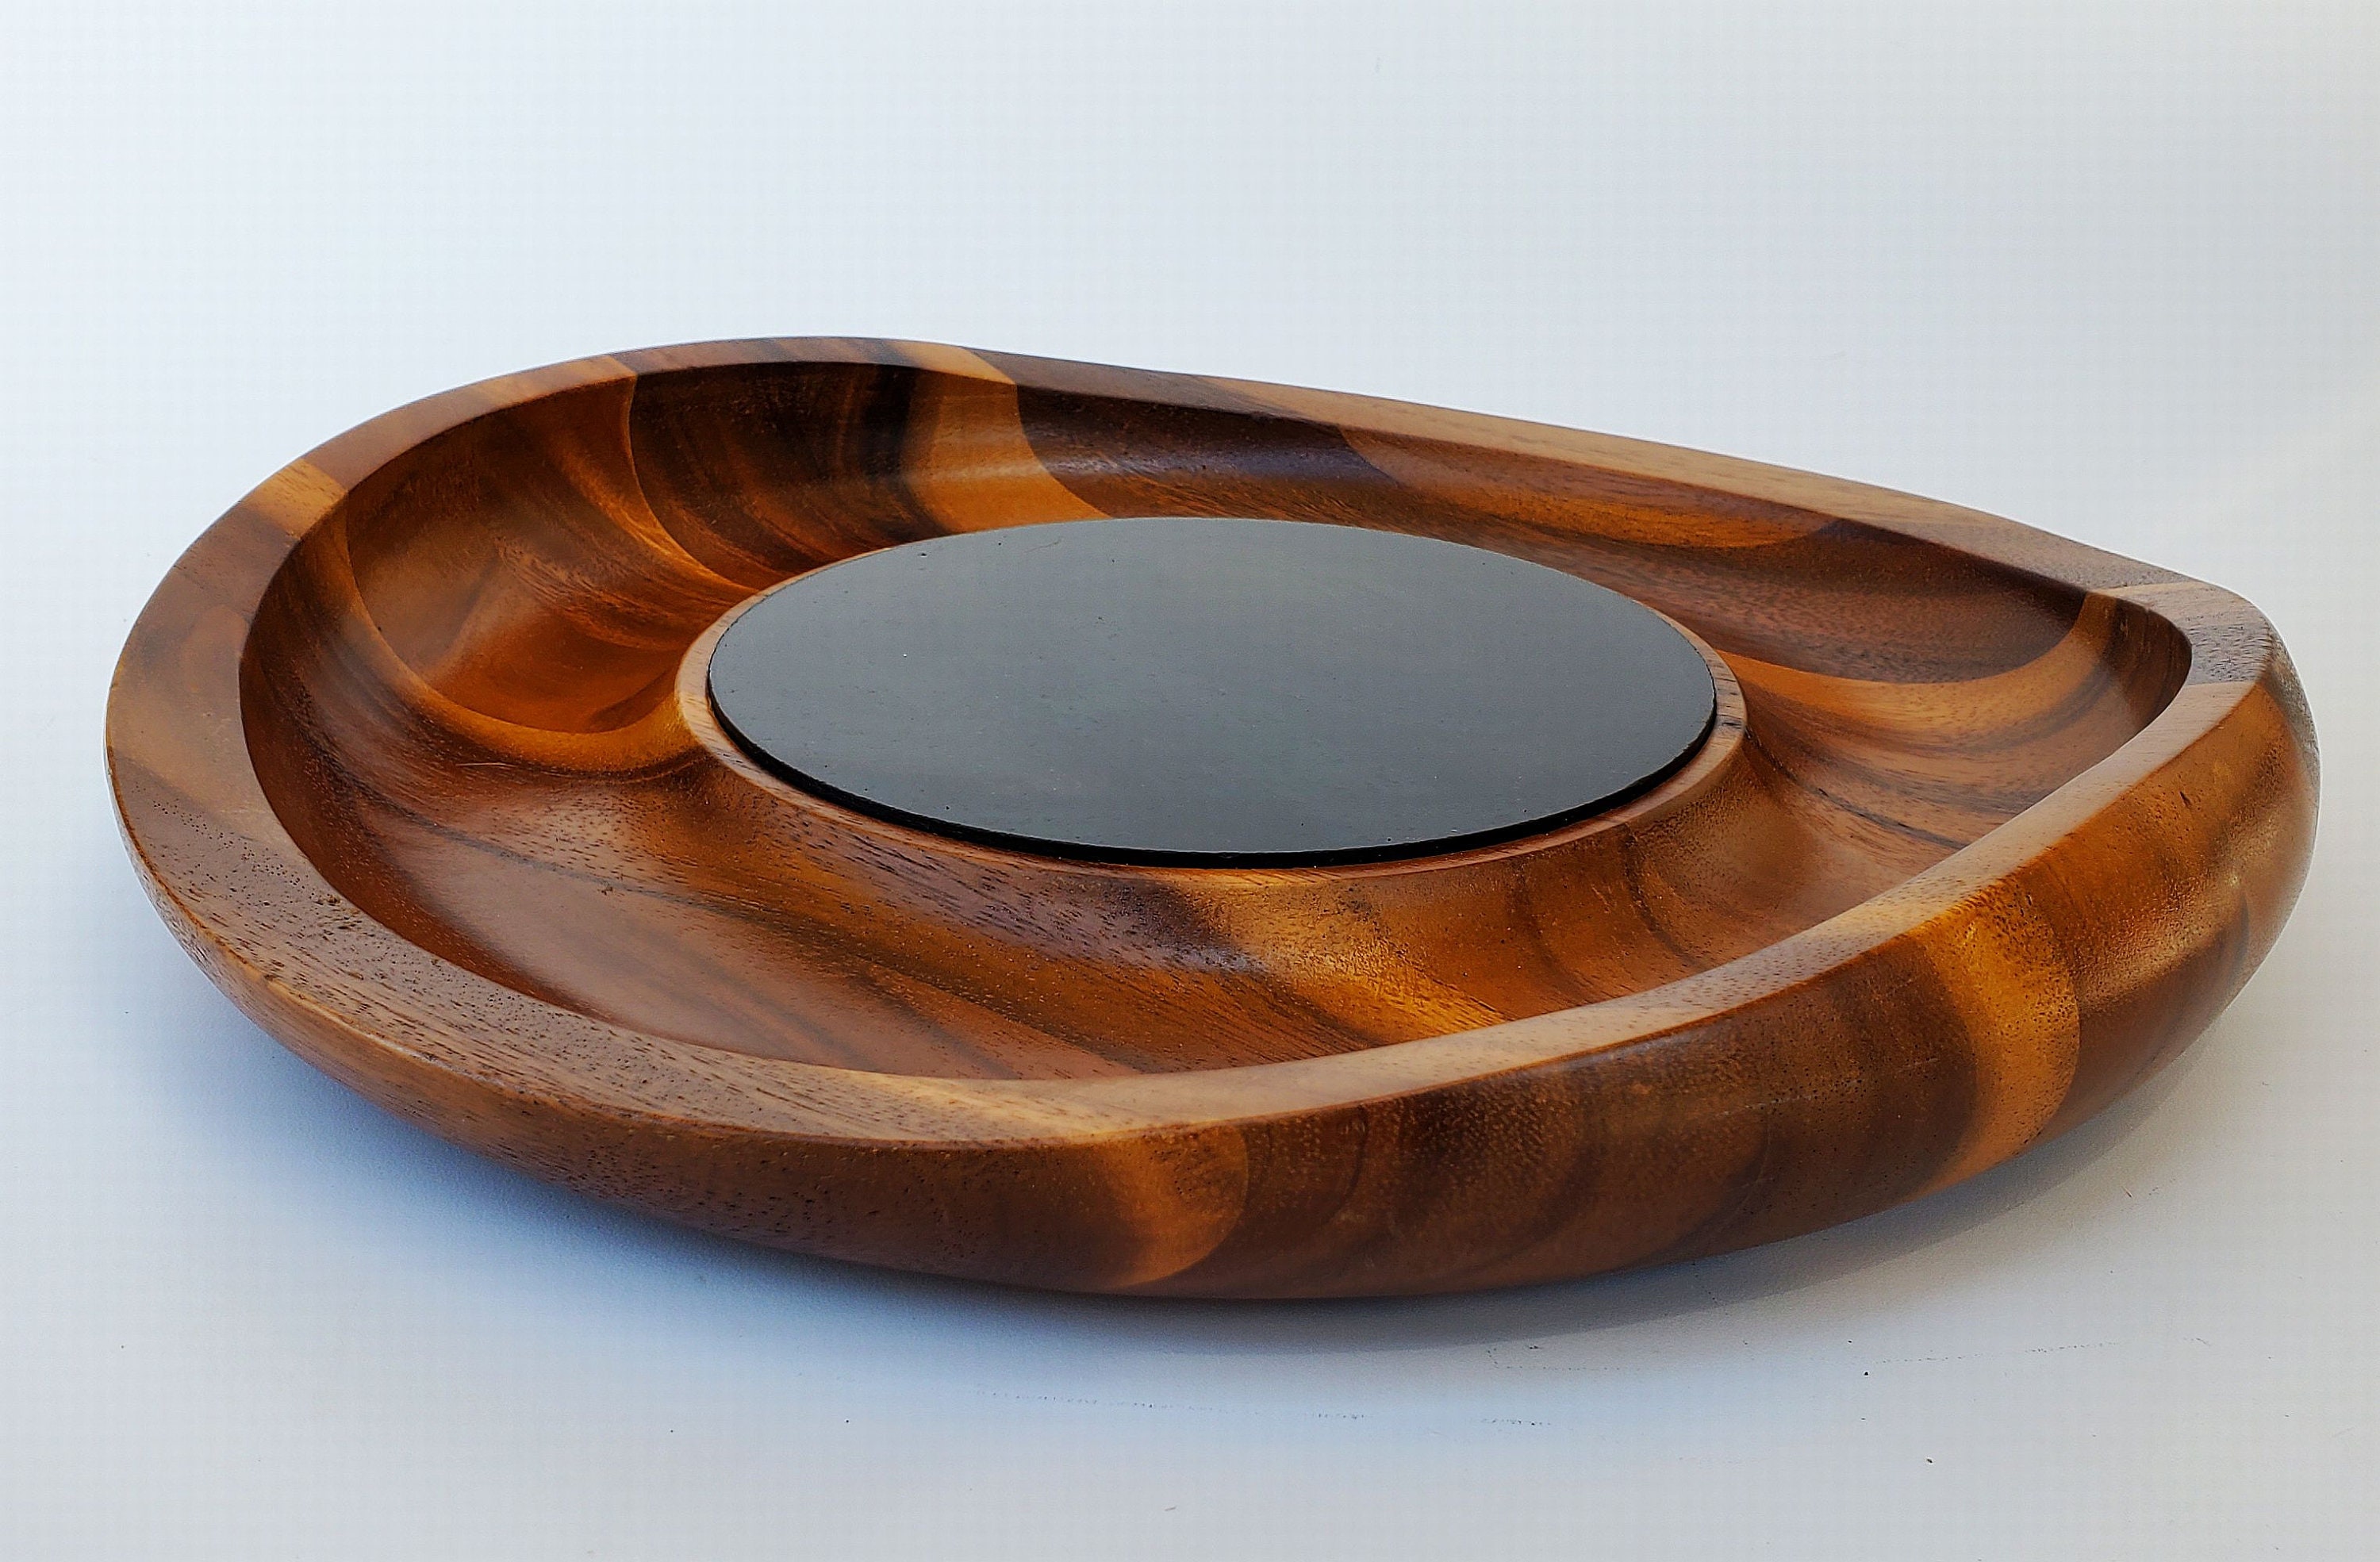 Acacia Wood Unique MCM Bowl Nambe Butterfly Chesse Tray Sean O'Hara Designer Mid Century Style Wooden Bowl Signed Granite Center